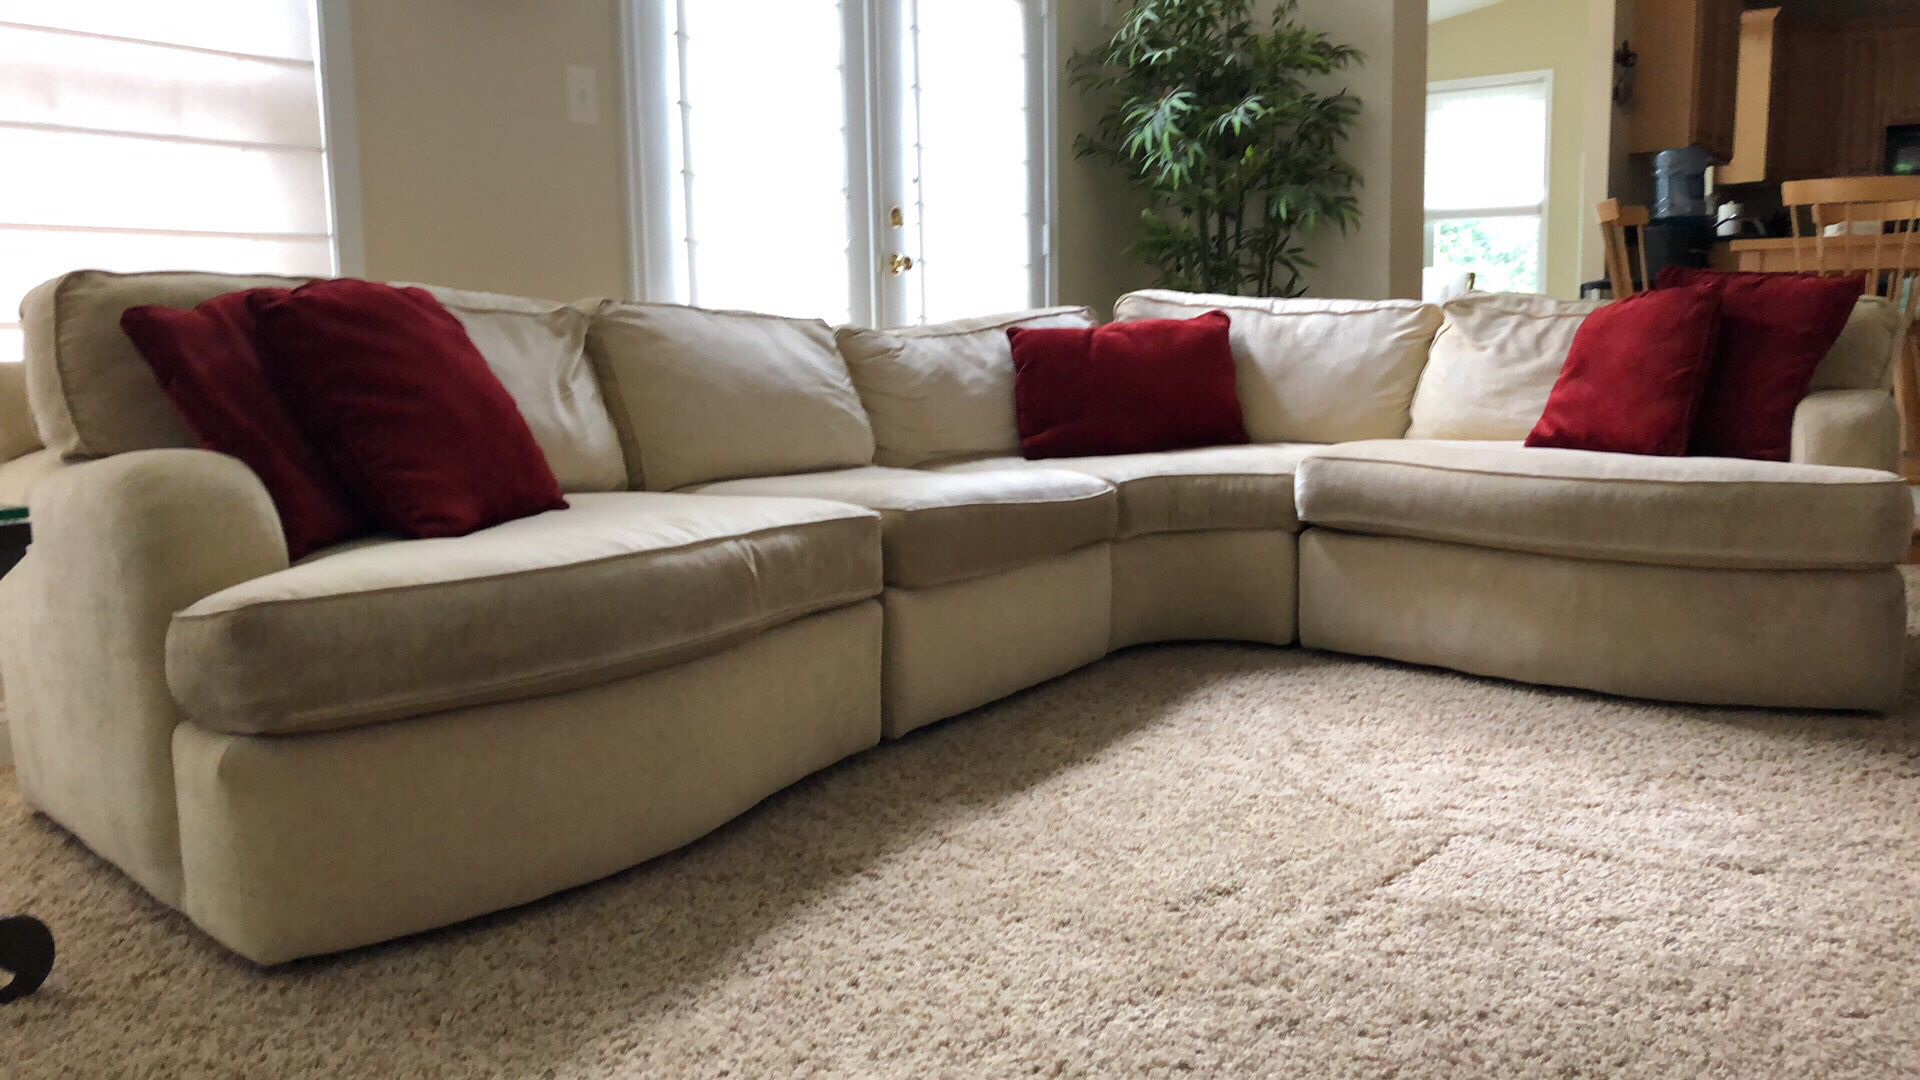 Cream colored 4 piece sectional couch